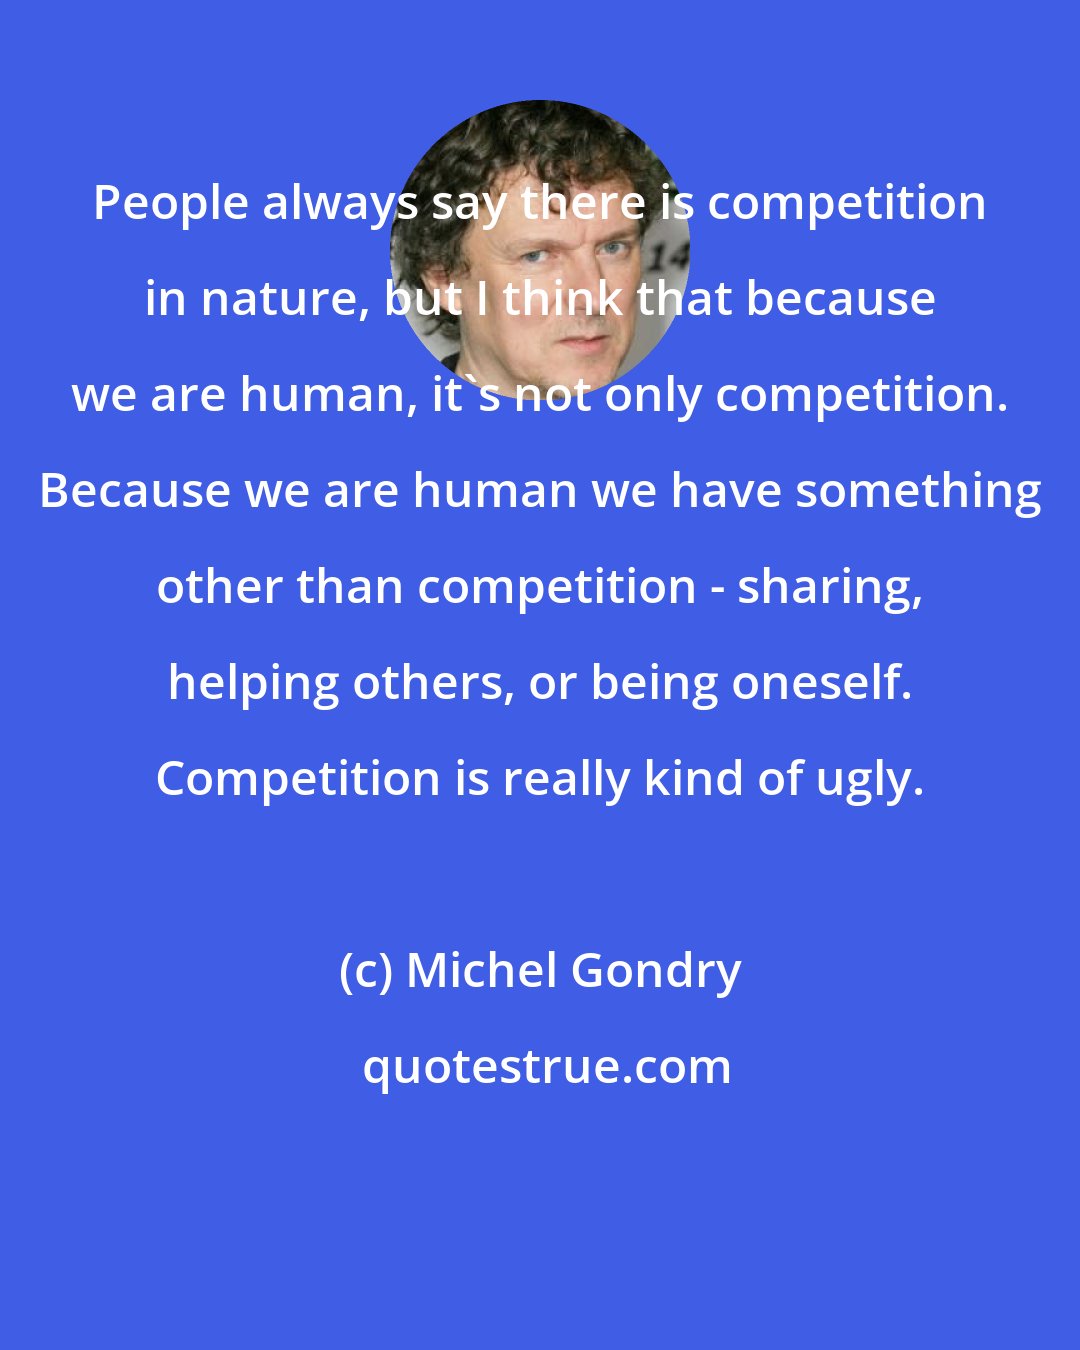 Michel Gondry: People always say there is competition in nature, but I think that because we are human, it's not only competition. Because we are human we have something other than competition - sharing, helping others, or being oneself. Competition is really kind of ugly.